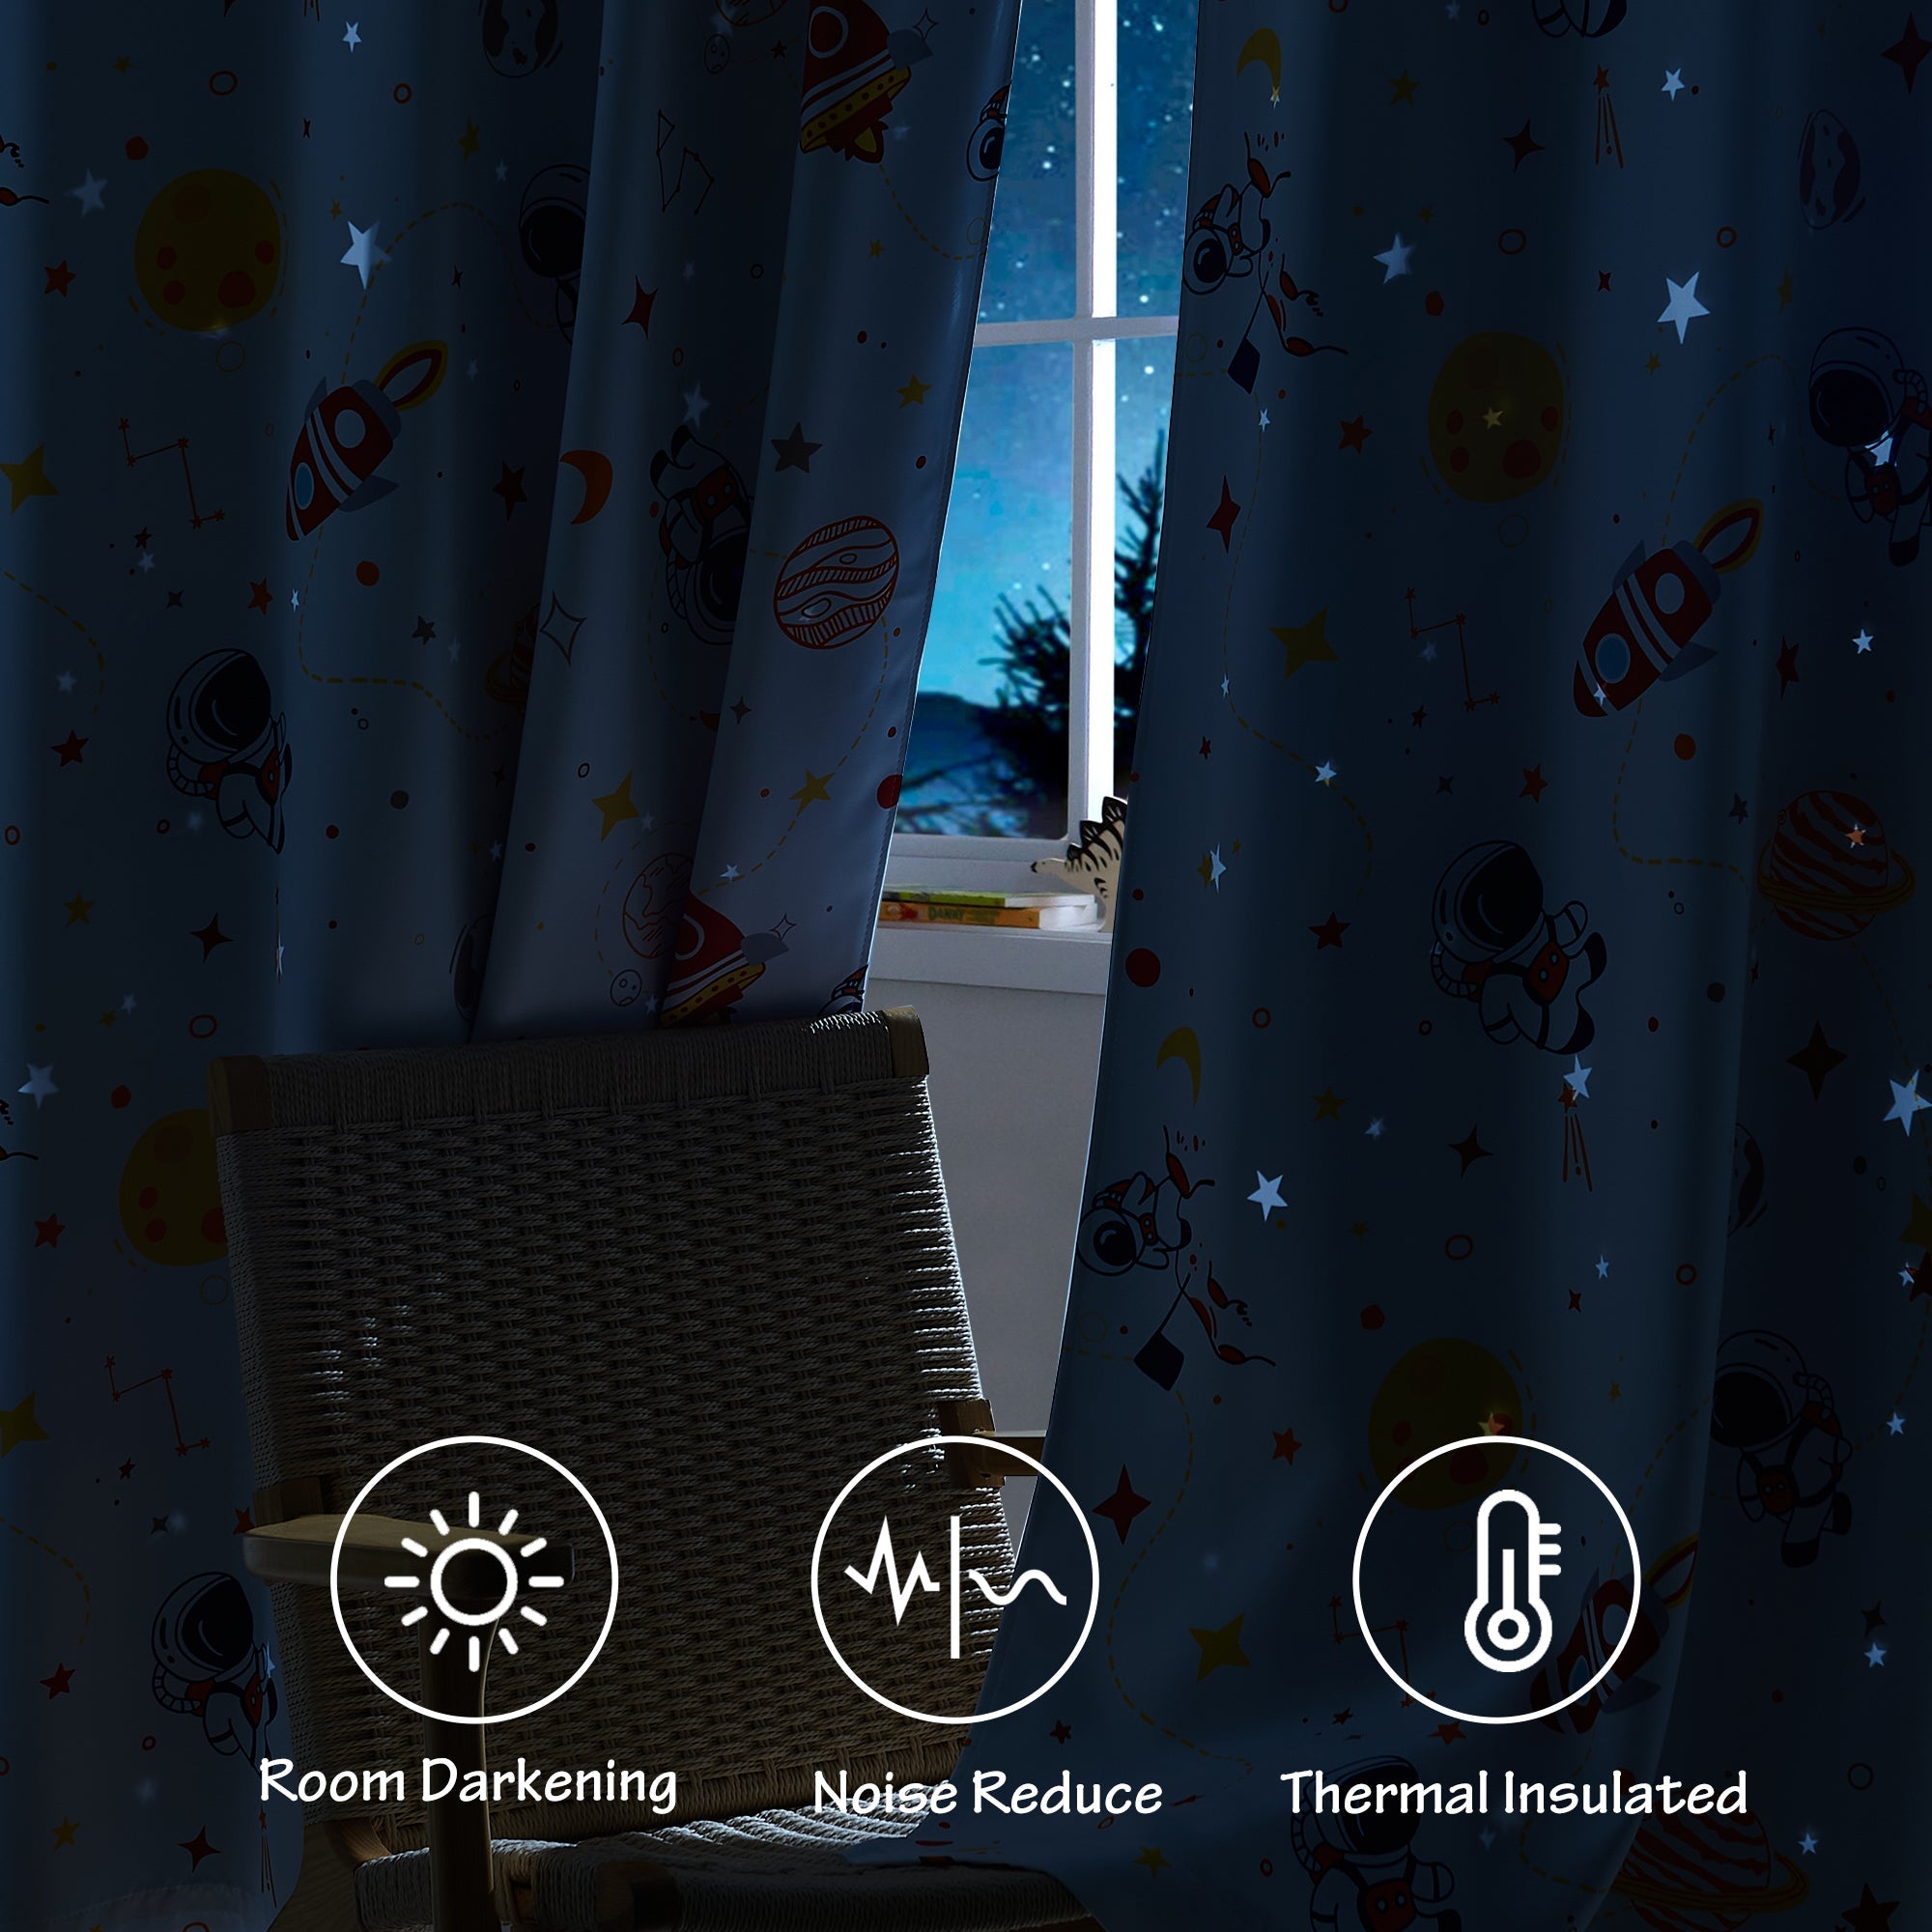 Astronaut Double Layer Back Cutout Stars Grommet Thermal Blackout Curtains For Bedroom 1 Panel KGORGE Store